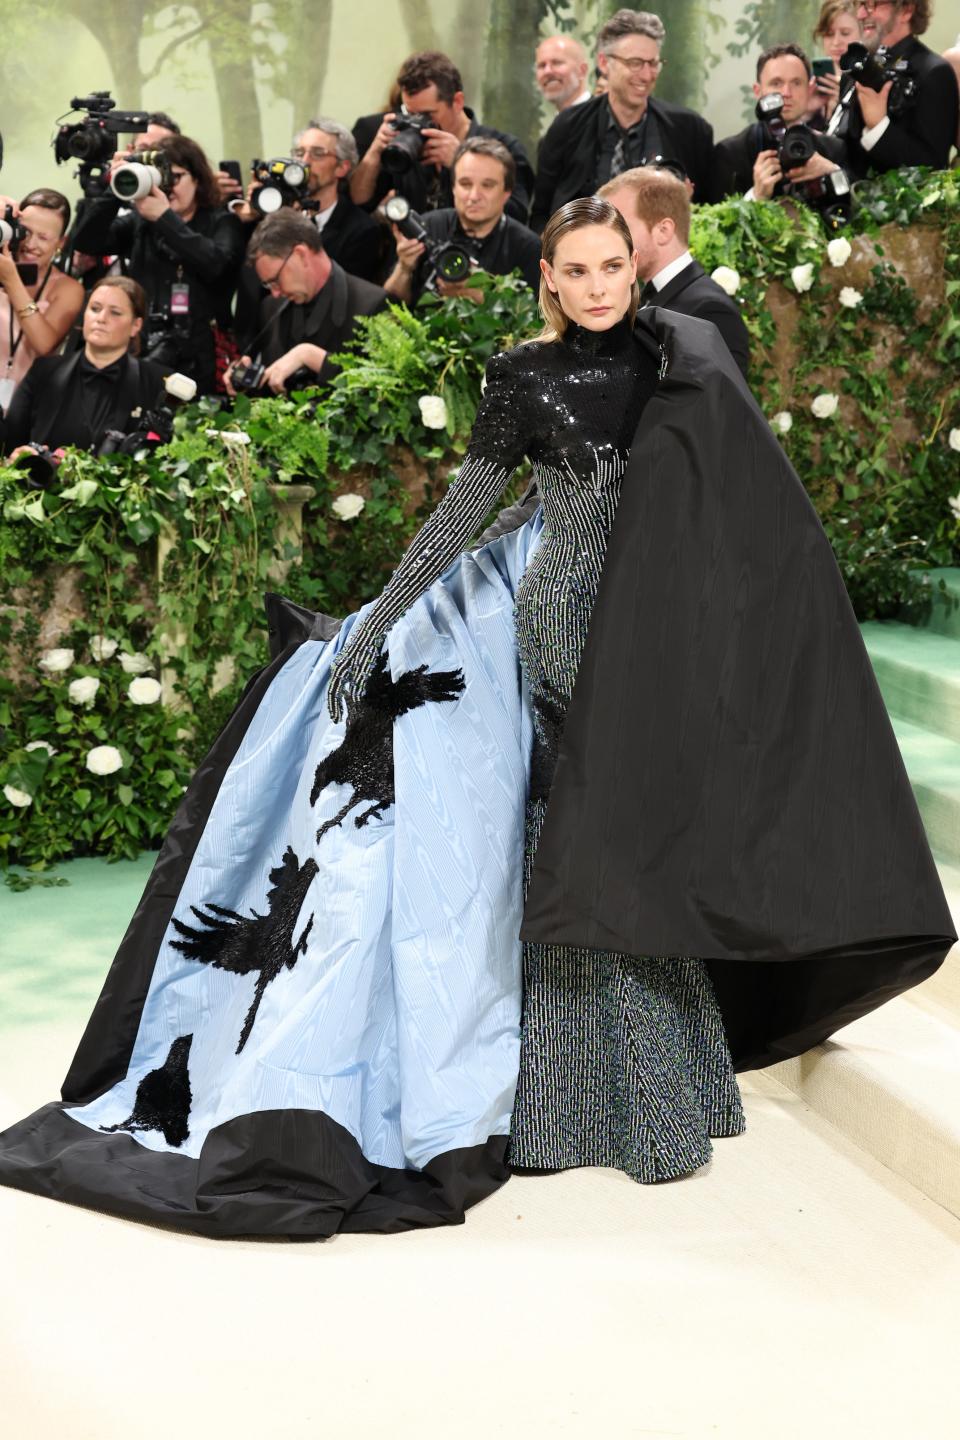 Rebecca Ferguson in a gown with a blue skirt featuring bird designs and a black cape, posing at an event with photographers in the background